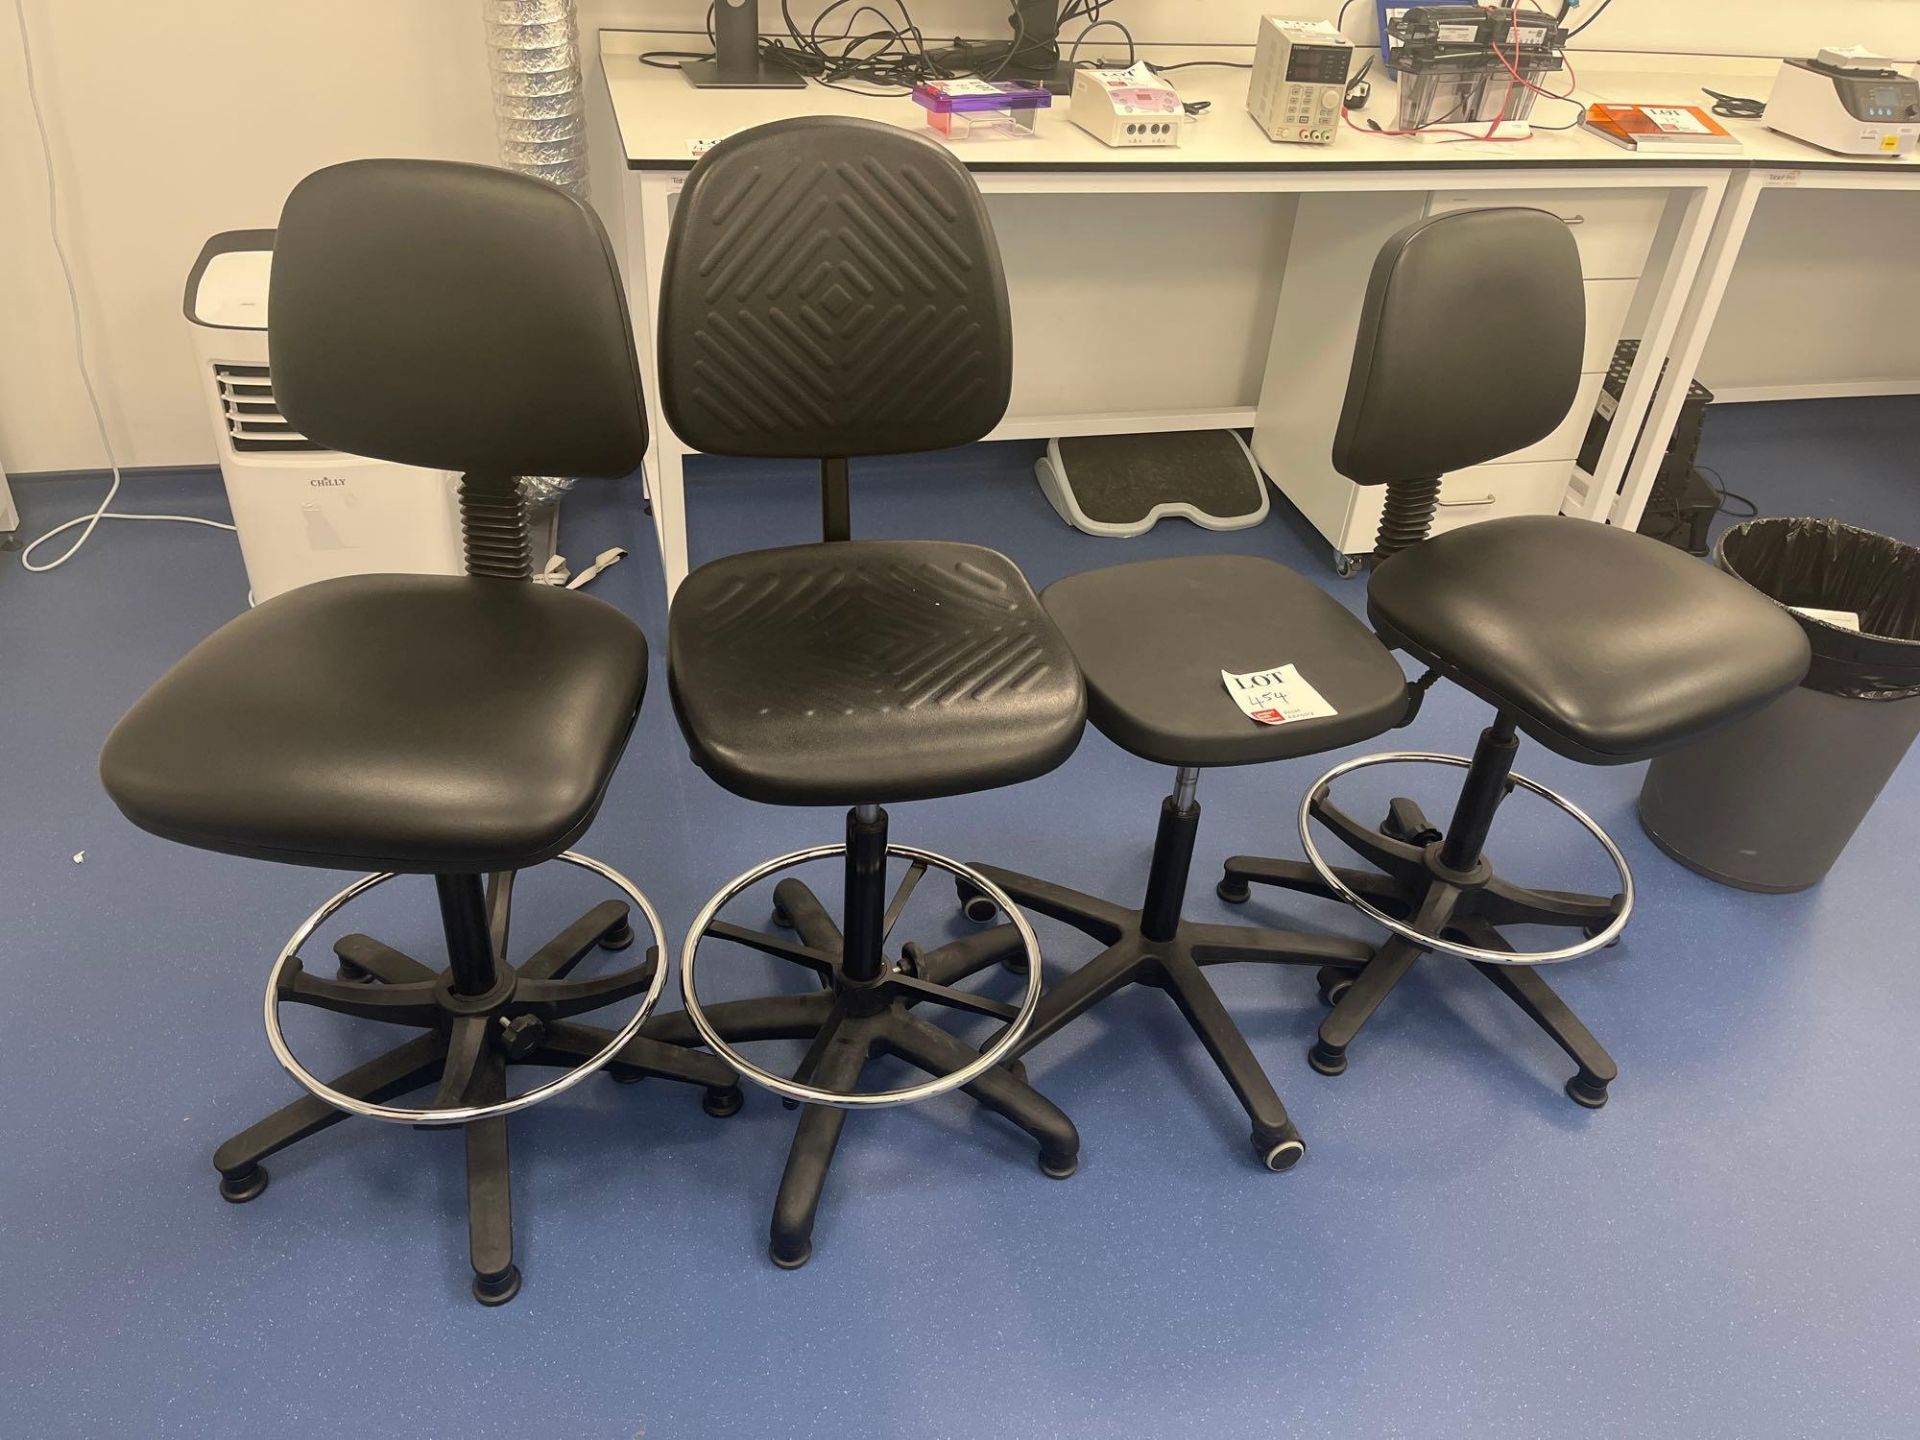 Three various black chairs and a black stool